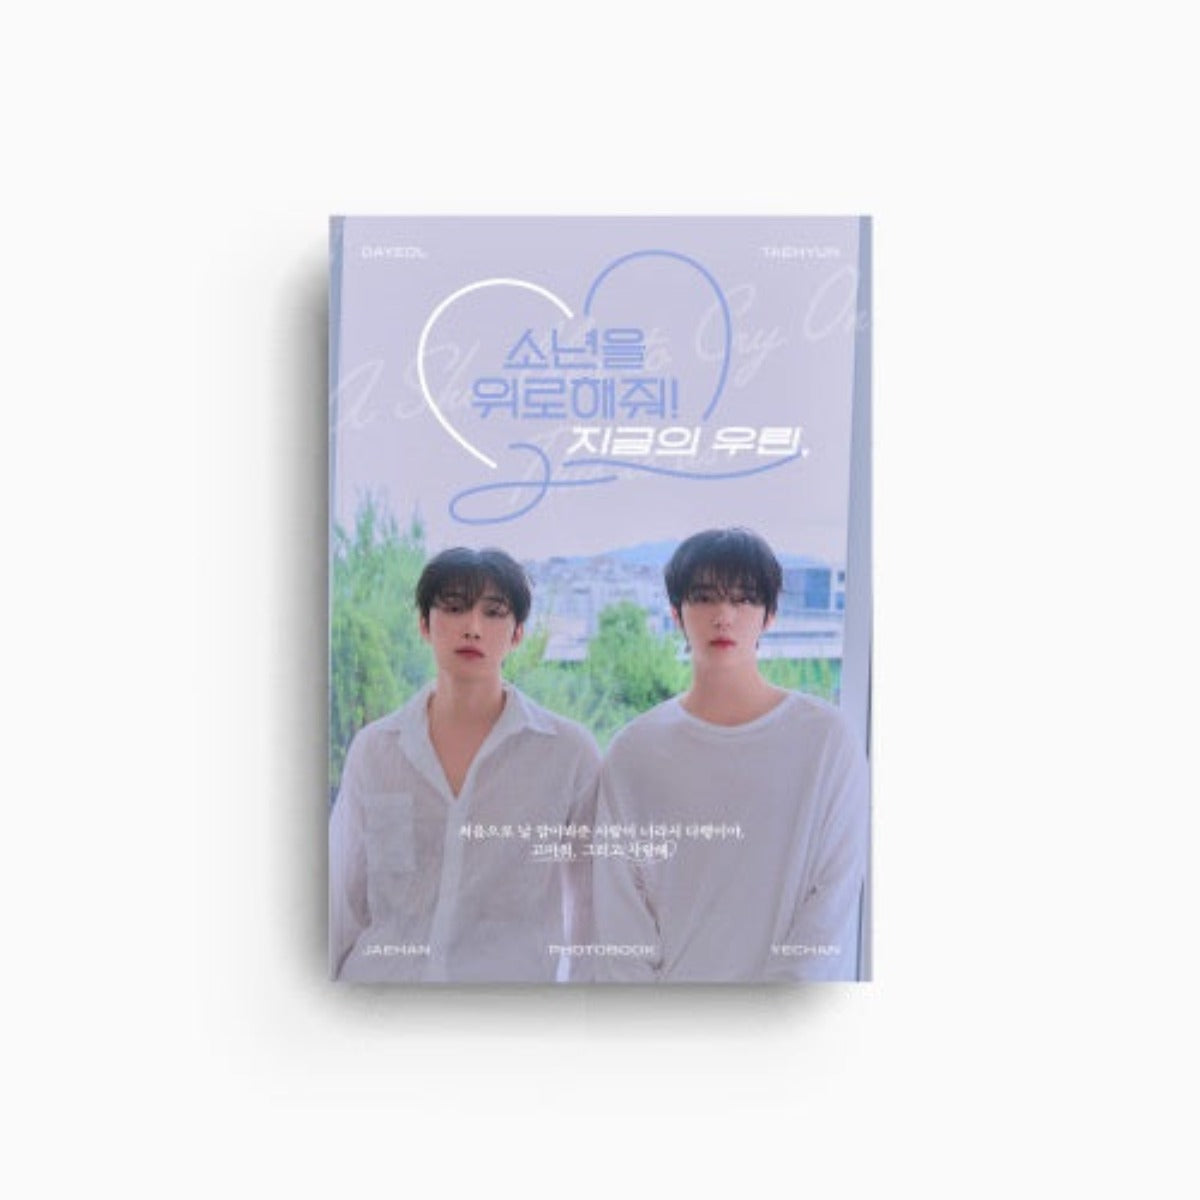 OMEGA X (JAEHAN, YECHAN) - A SHOULDER TO CRY ON WE ARE NOW PHOTO BOOK